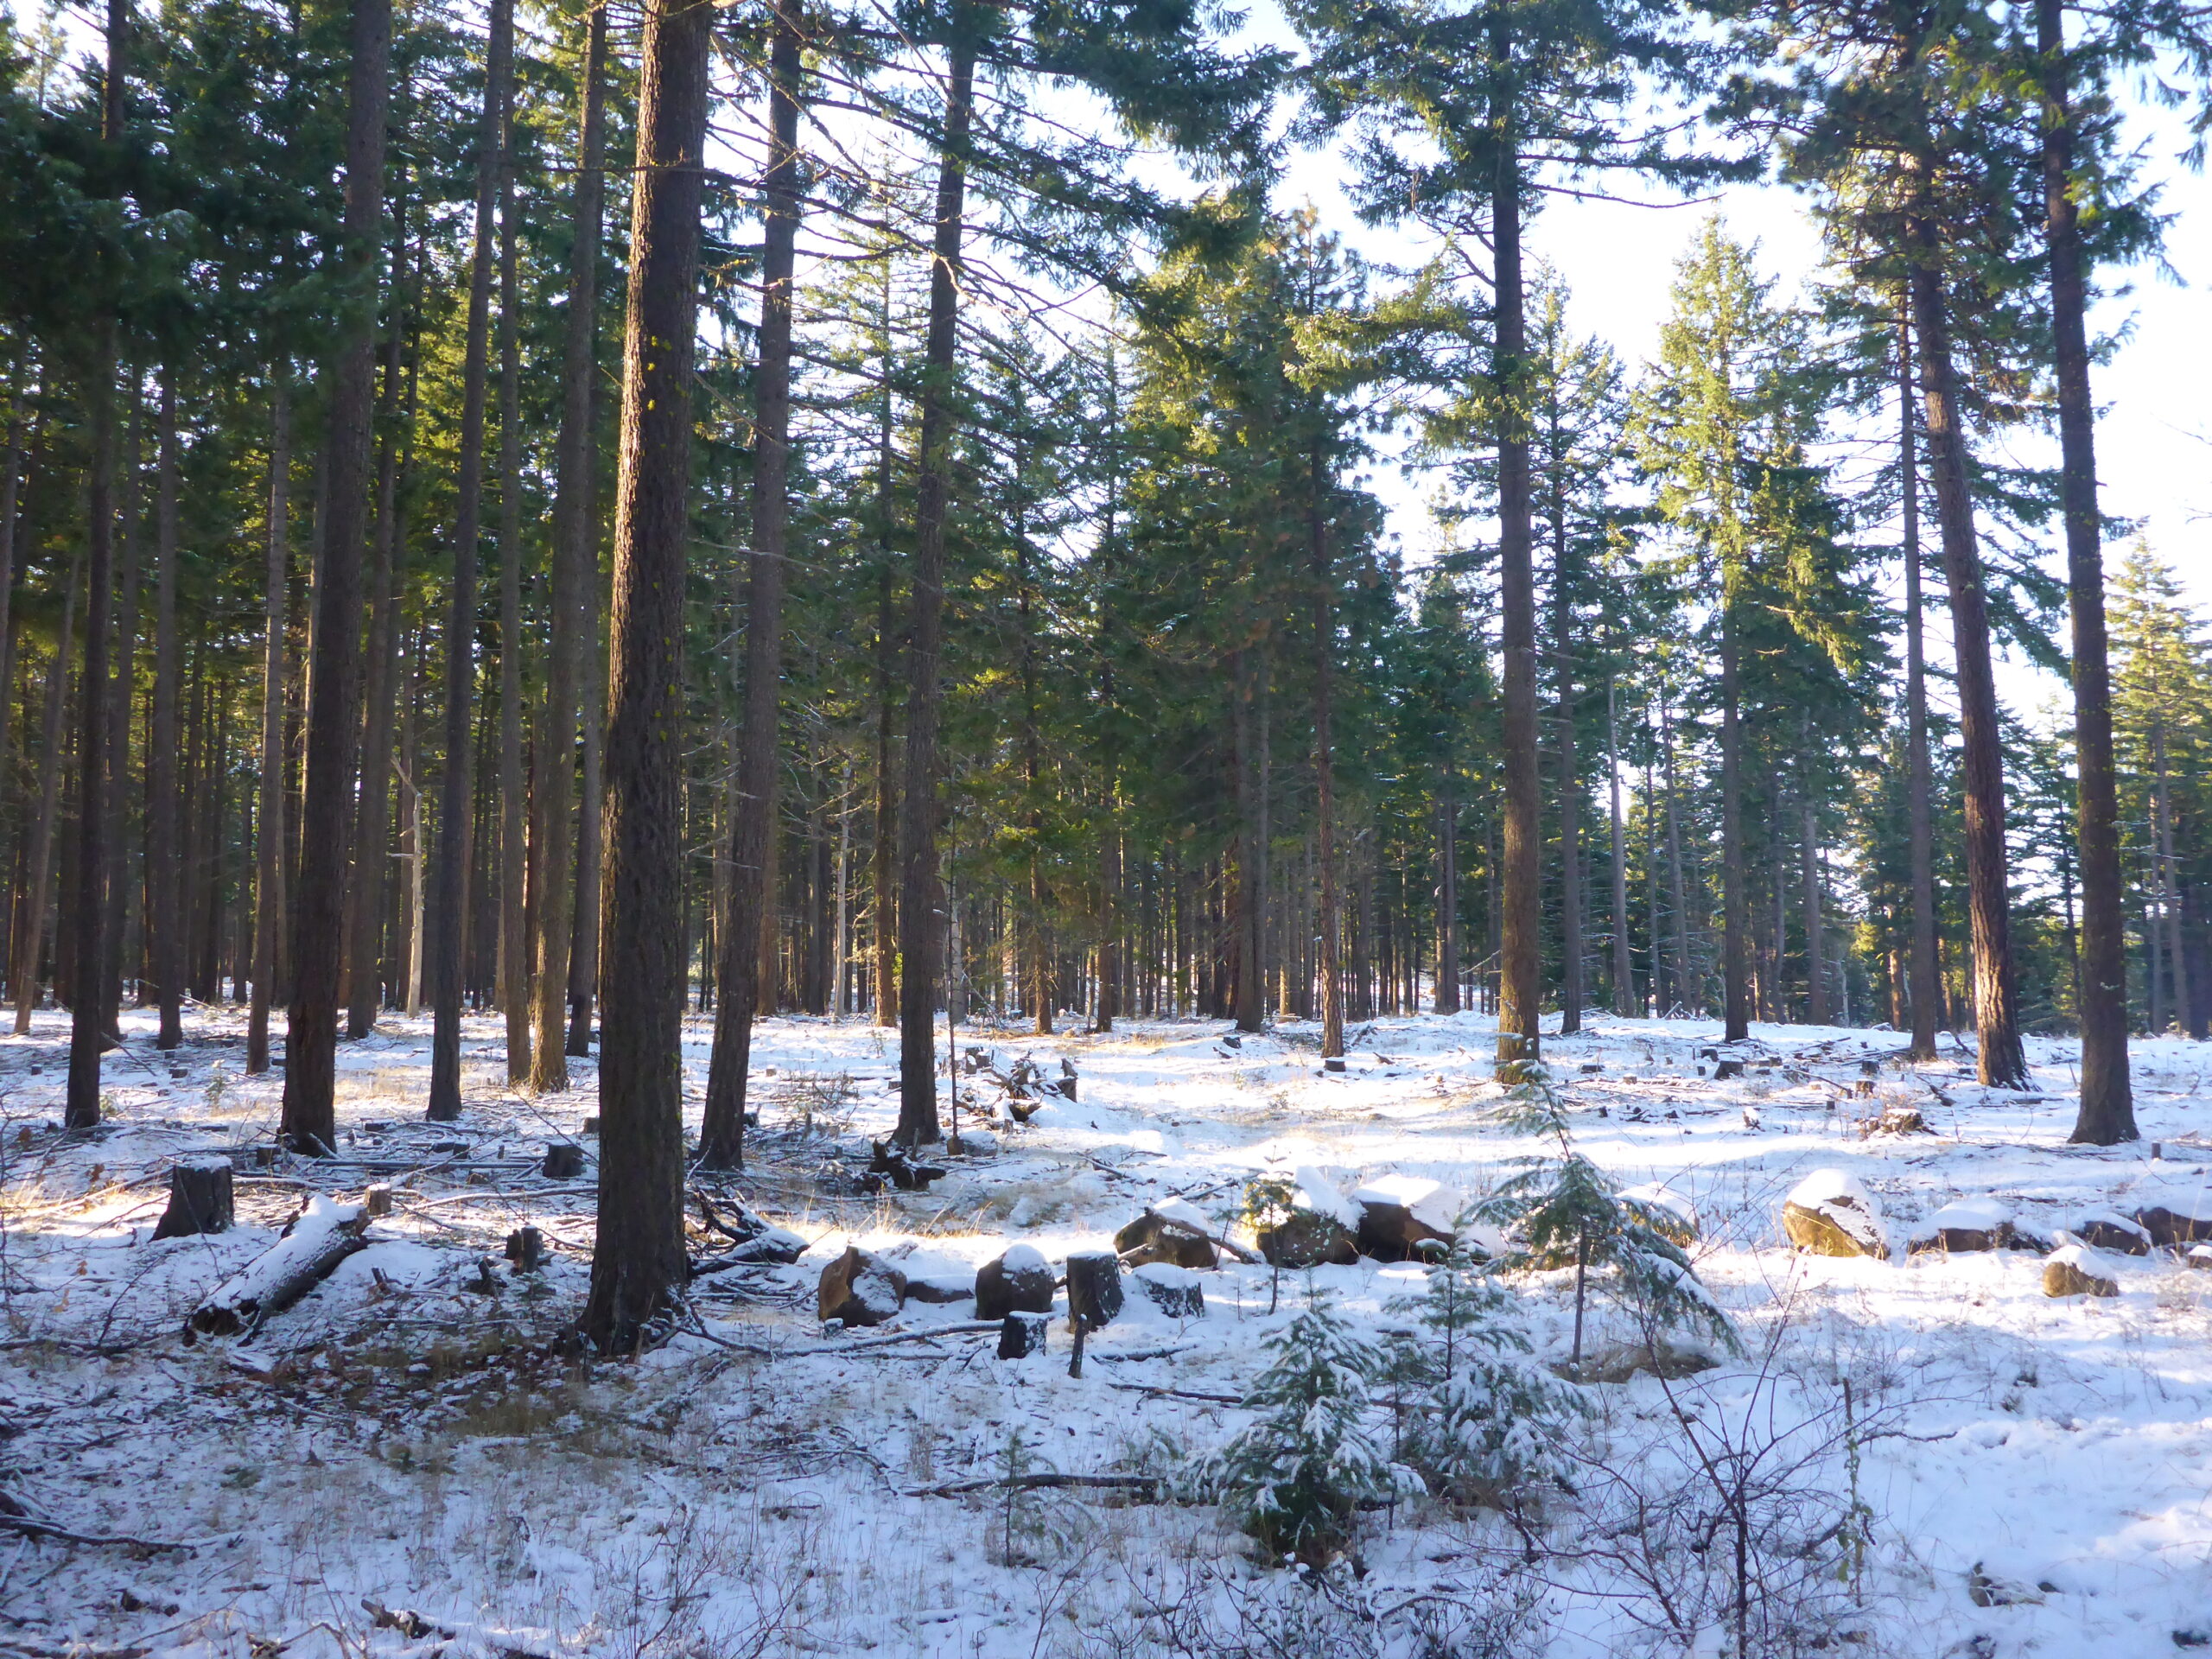 This is a landscape photo of a unit in Sportman's Park. The ground is covered with snow and there are tall thin trees evenly spaced from one another.